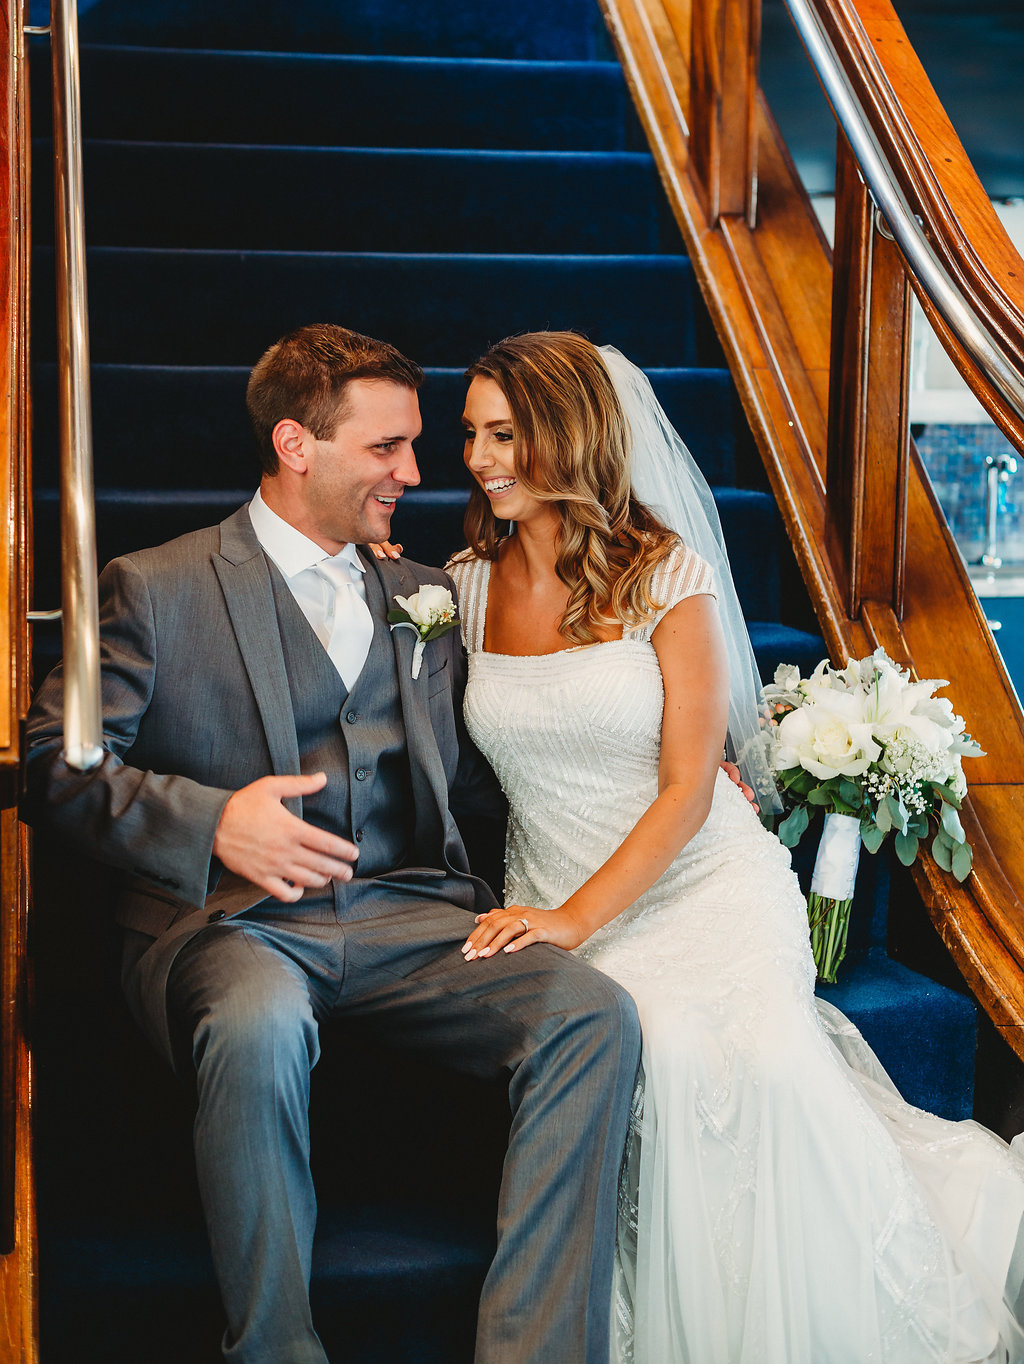 Florida Bride and Groom Wedding Portrait on Staircase | Tampa Waterfront Wedding Venue Yacht Starship IV